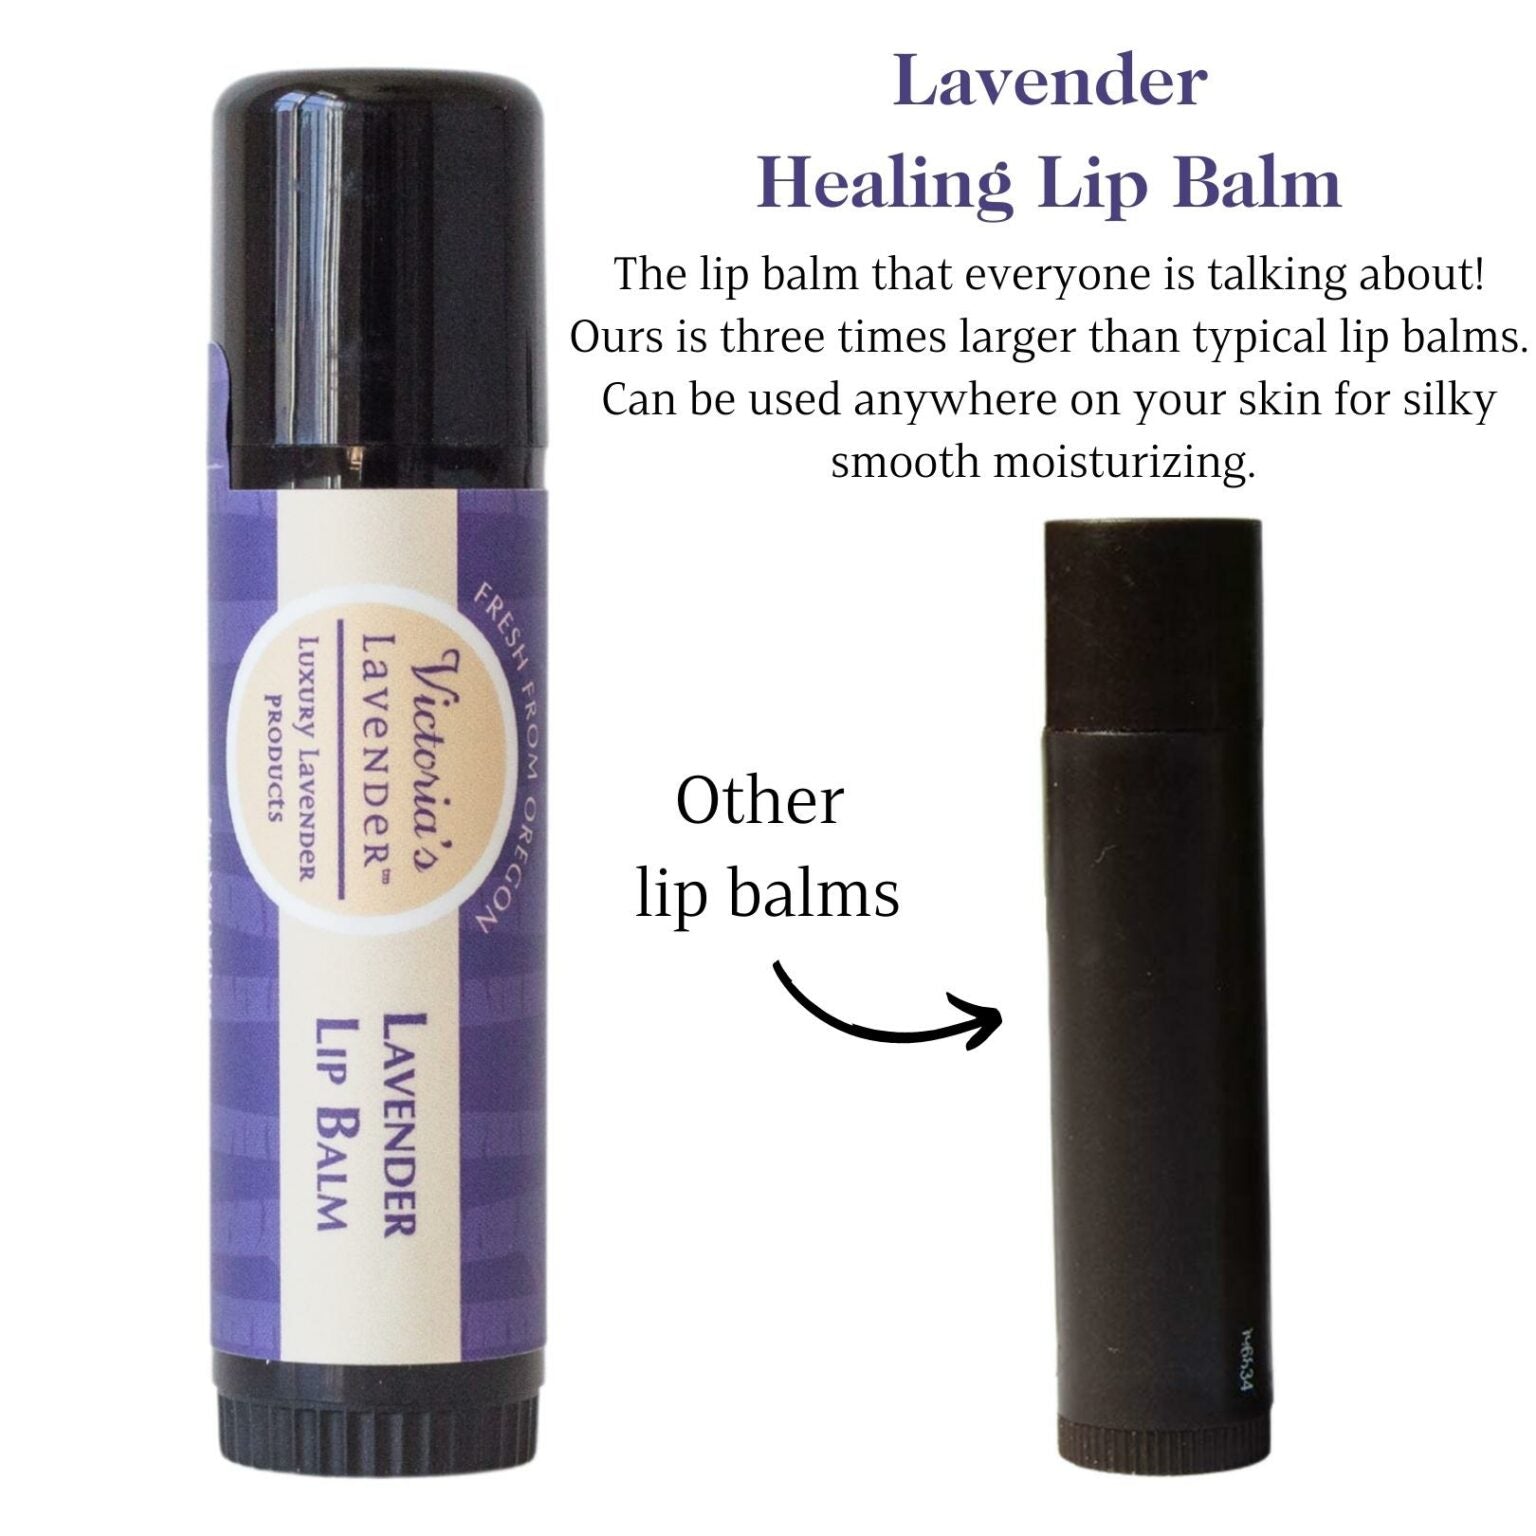 healing-lavender-lip-balm-moisturizing-body-stick-three-times-larger-compared-to-typical-lip-balm